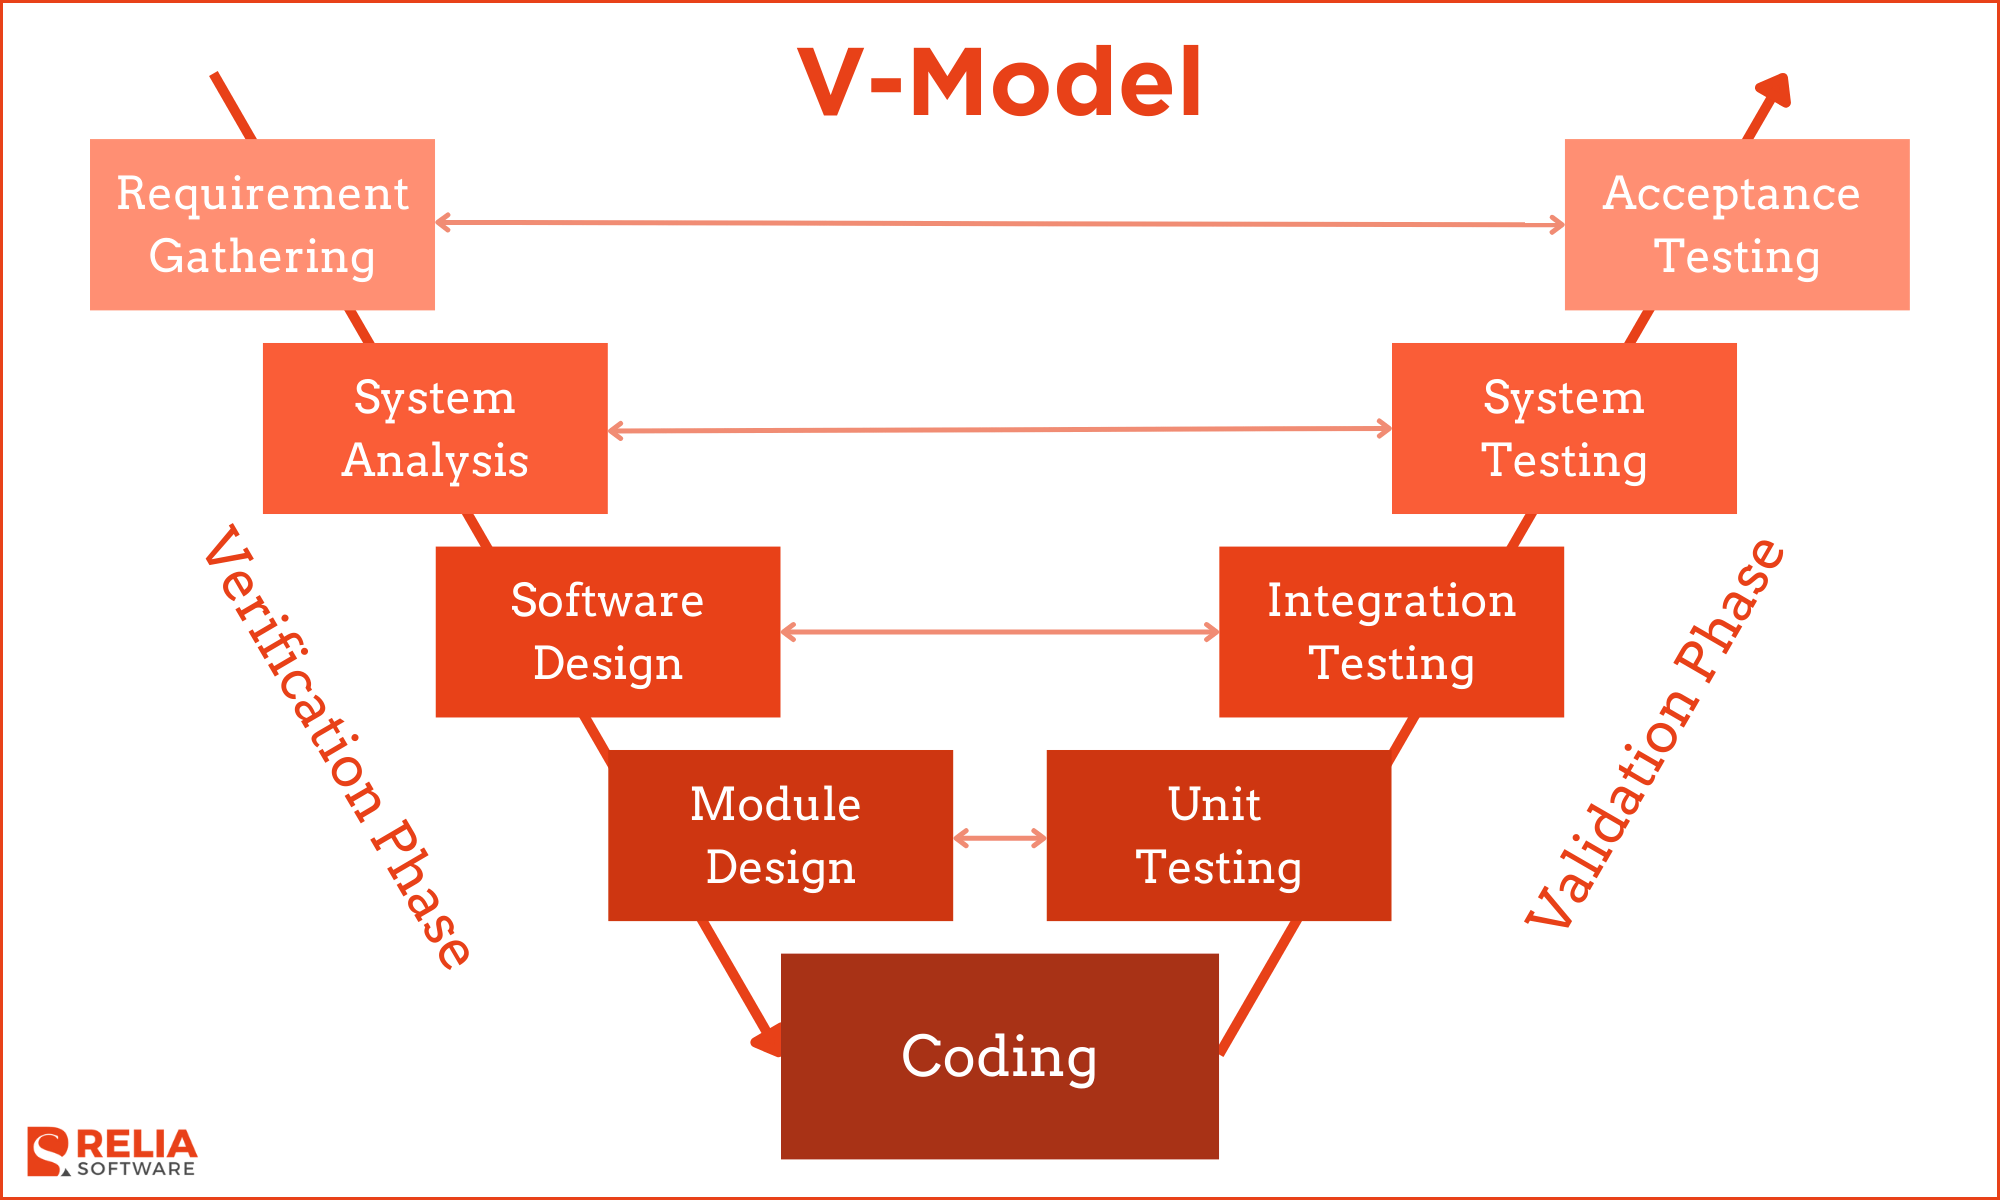 The V-Model enhances the traditional Waterfall approach by integrating verification and validation at each development stage.